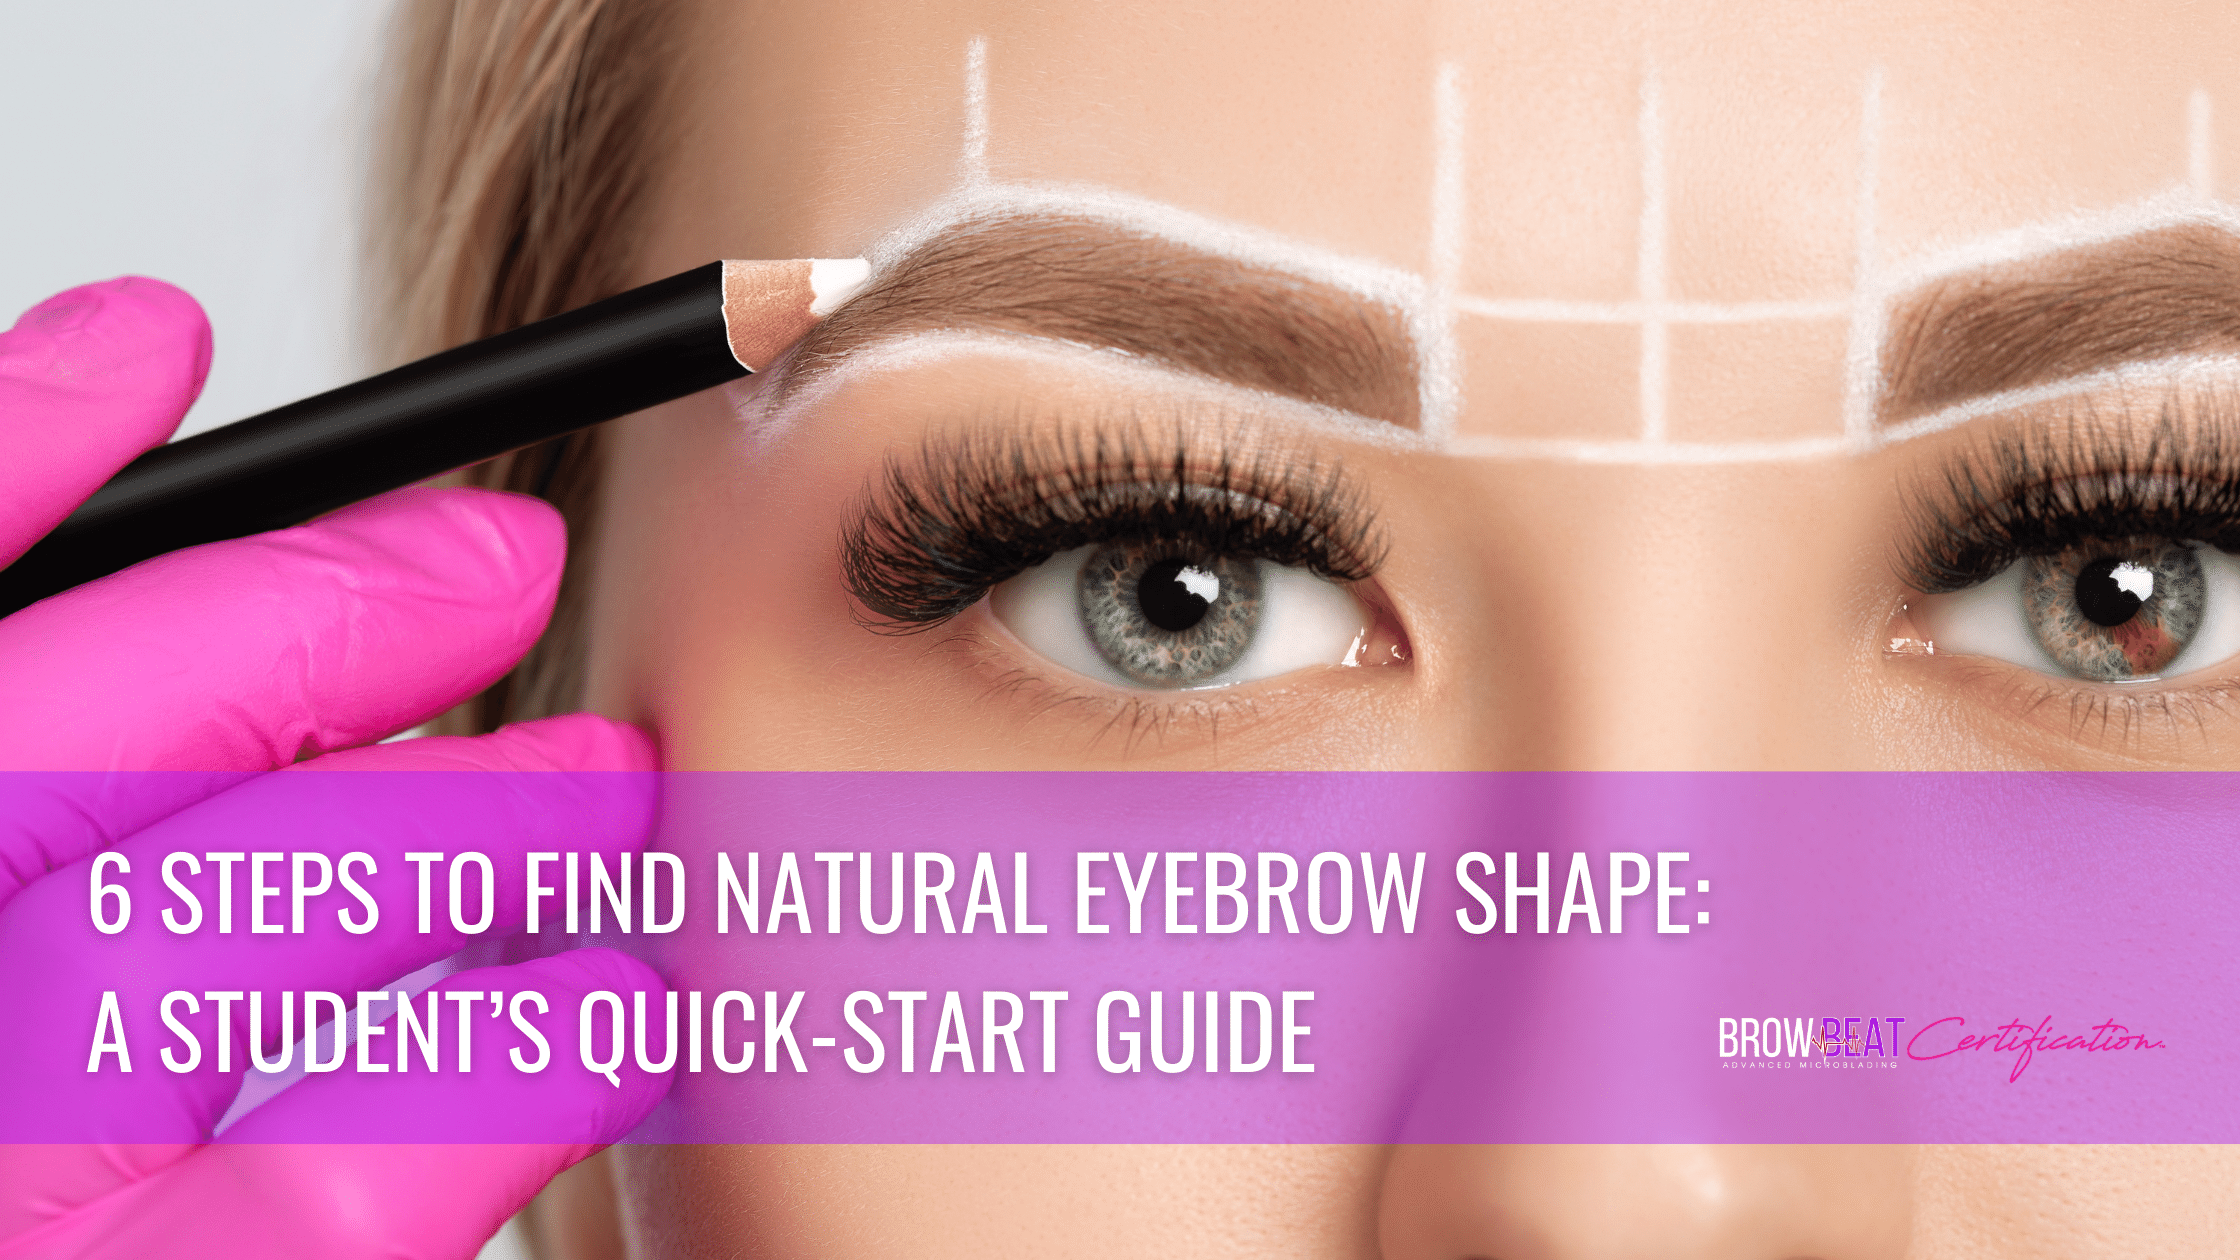 6 Steps to Find Natural Eyebrow Shape